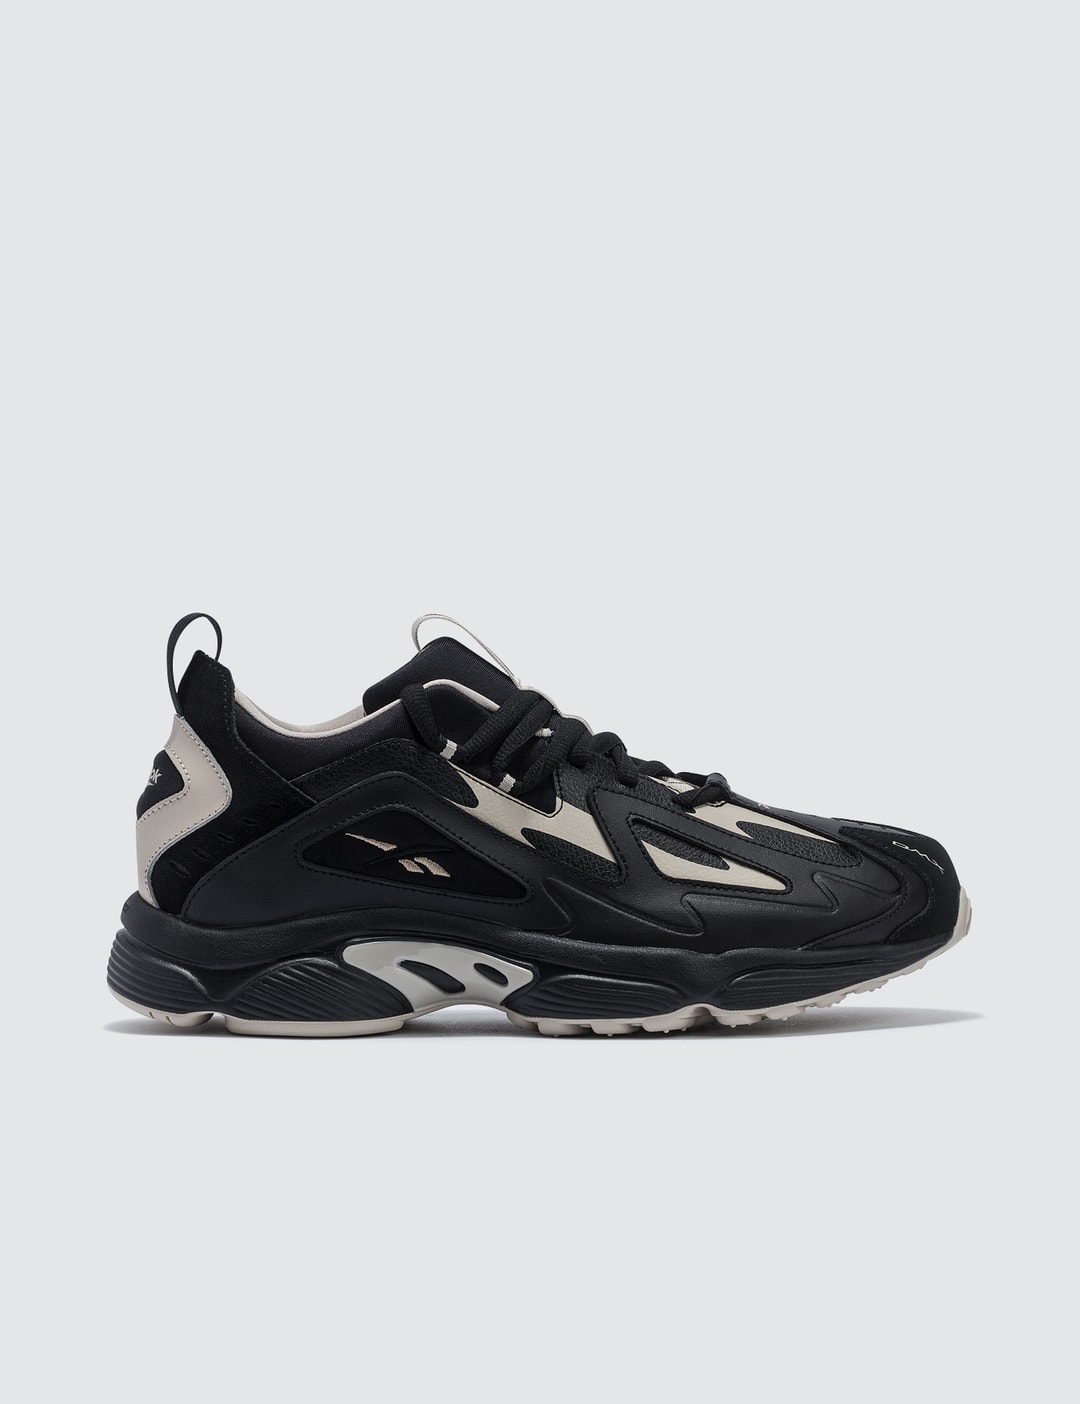 Vice dårligt bestyrelse Reebok - Wanna One x Reebok DMX Series 1200 "Park Woojin" | HBX - Globally  Curated Fashion and Lifestyle by Hypebeast